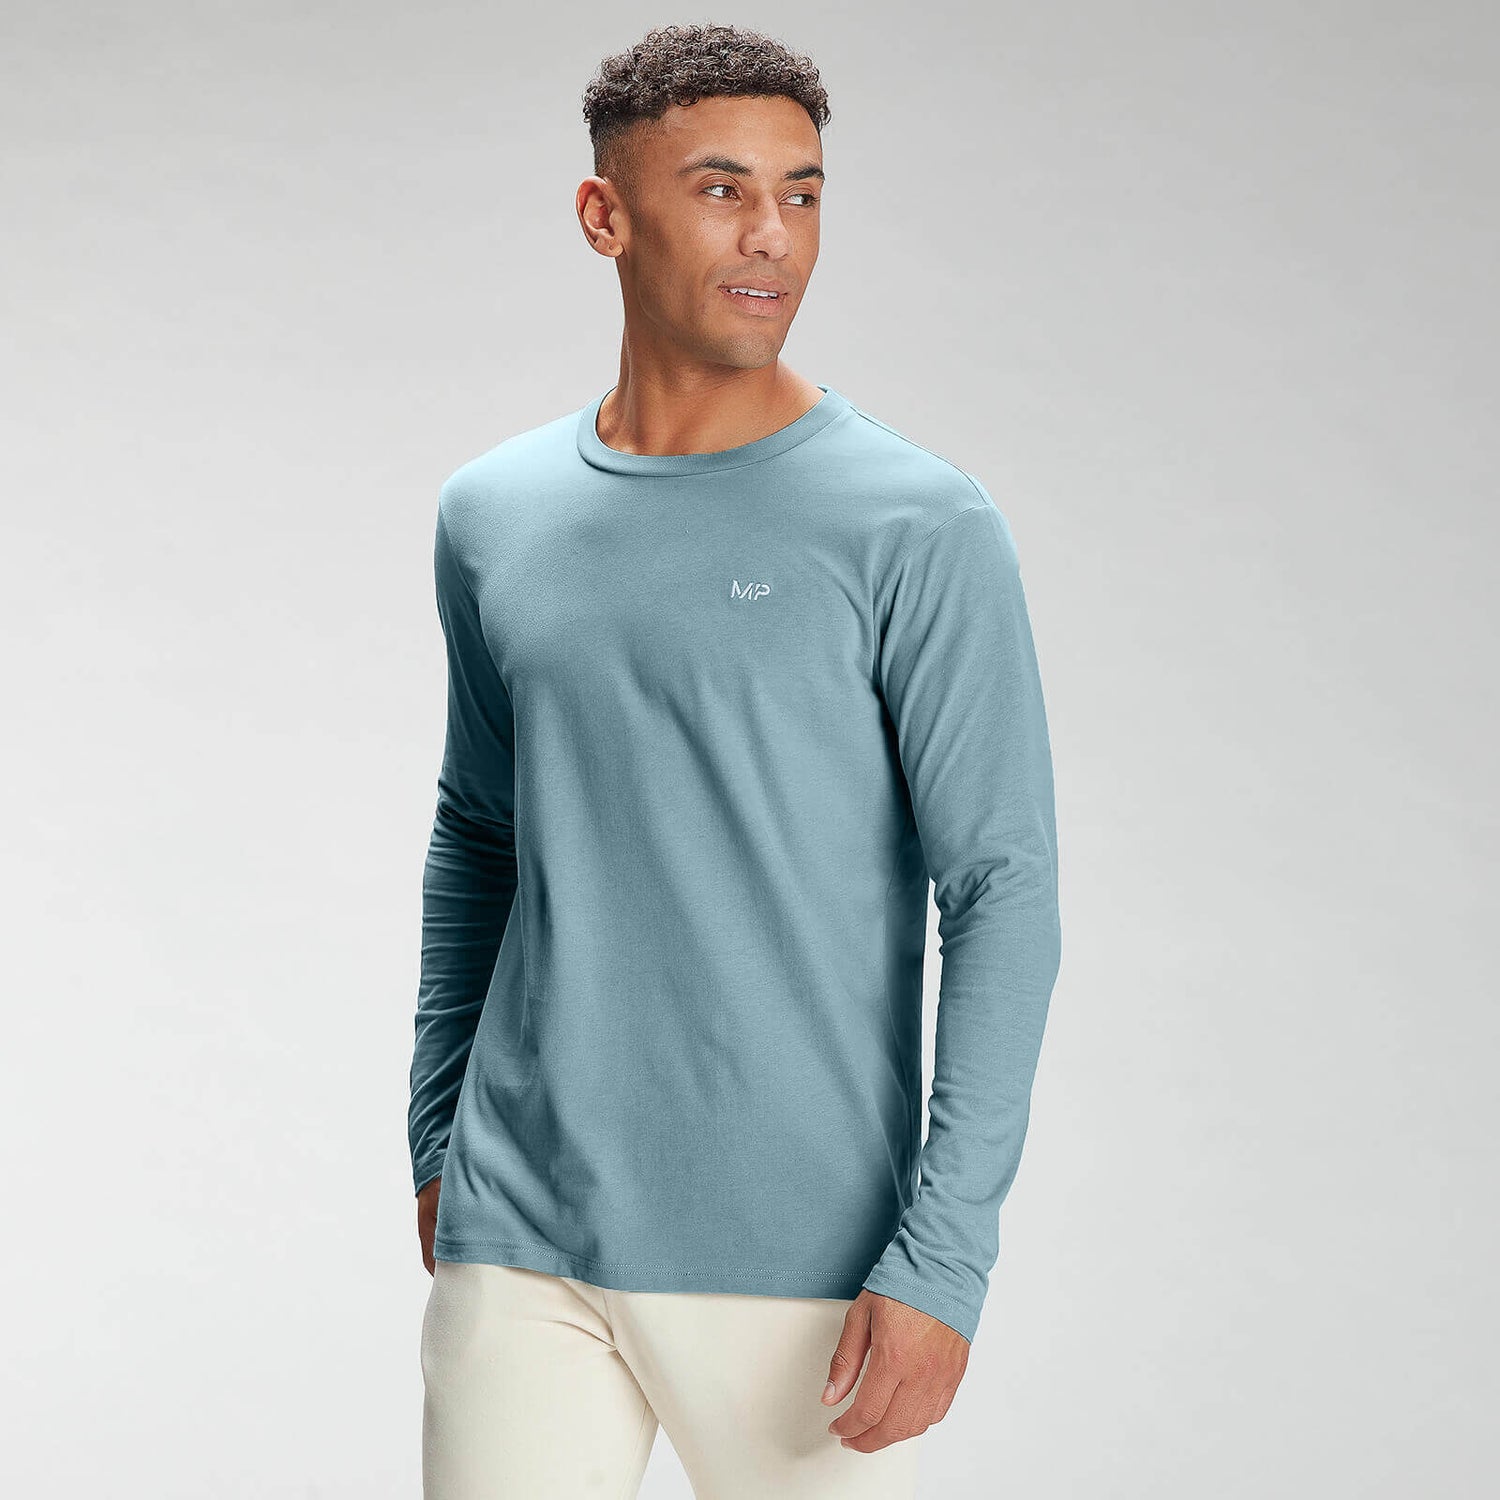 MP Men's Rest Day Long Sleeve Top - Ice Blue - XS